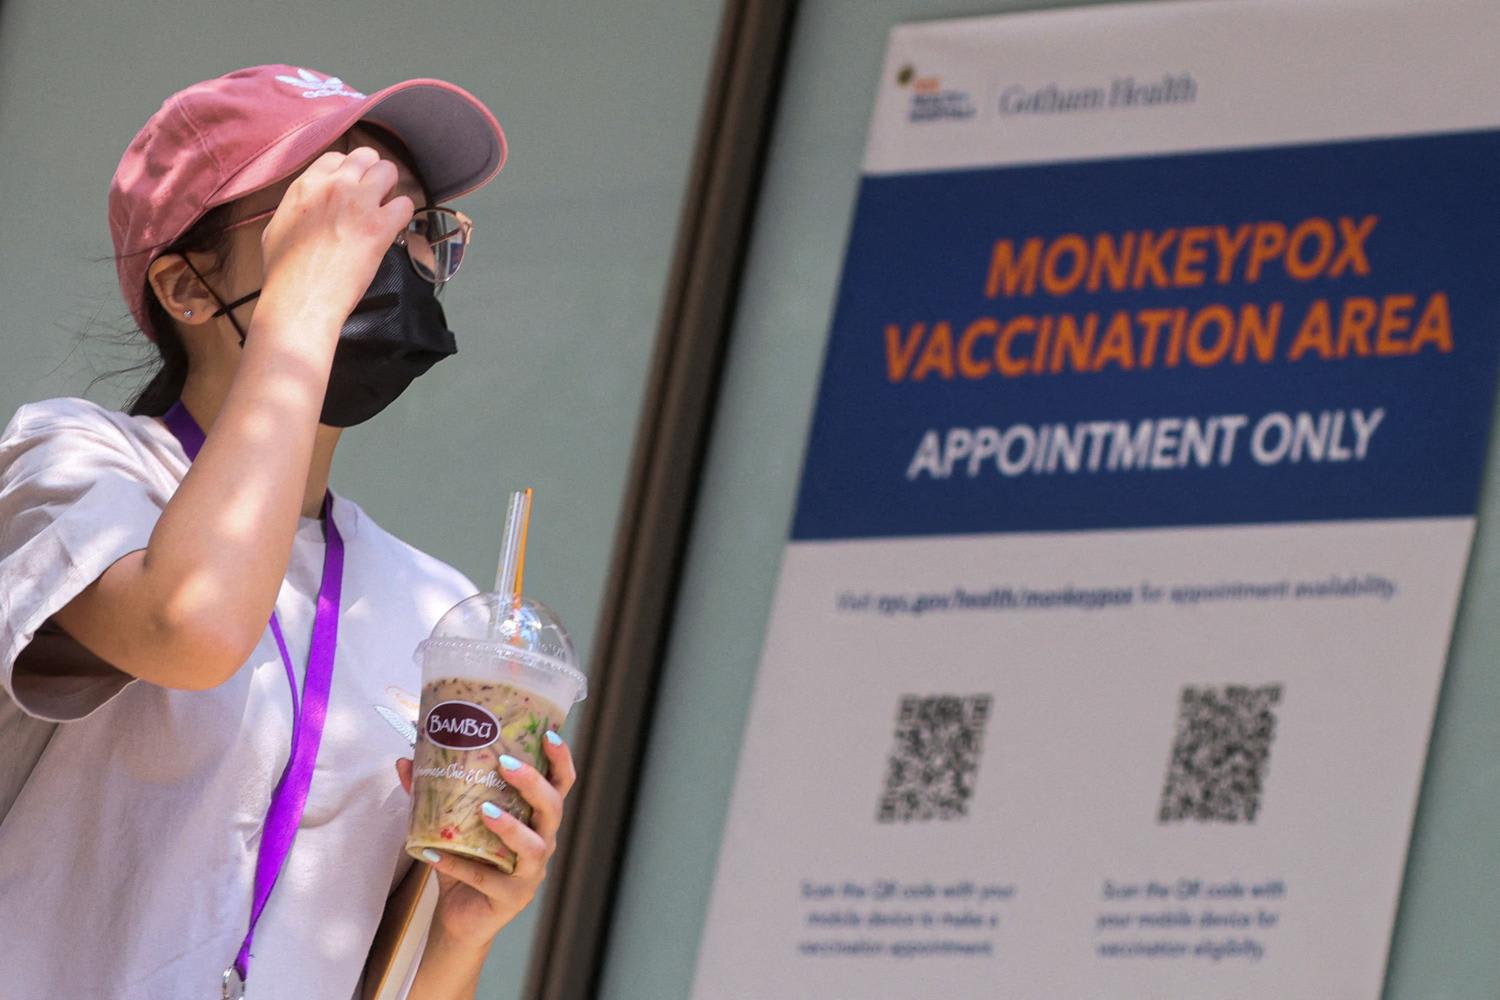 A woman arrives at a monkeypox vaccination site in New York City on Aug 15, 2022. 
